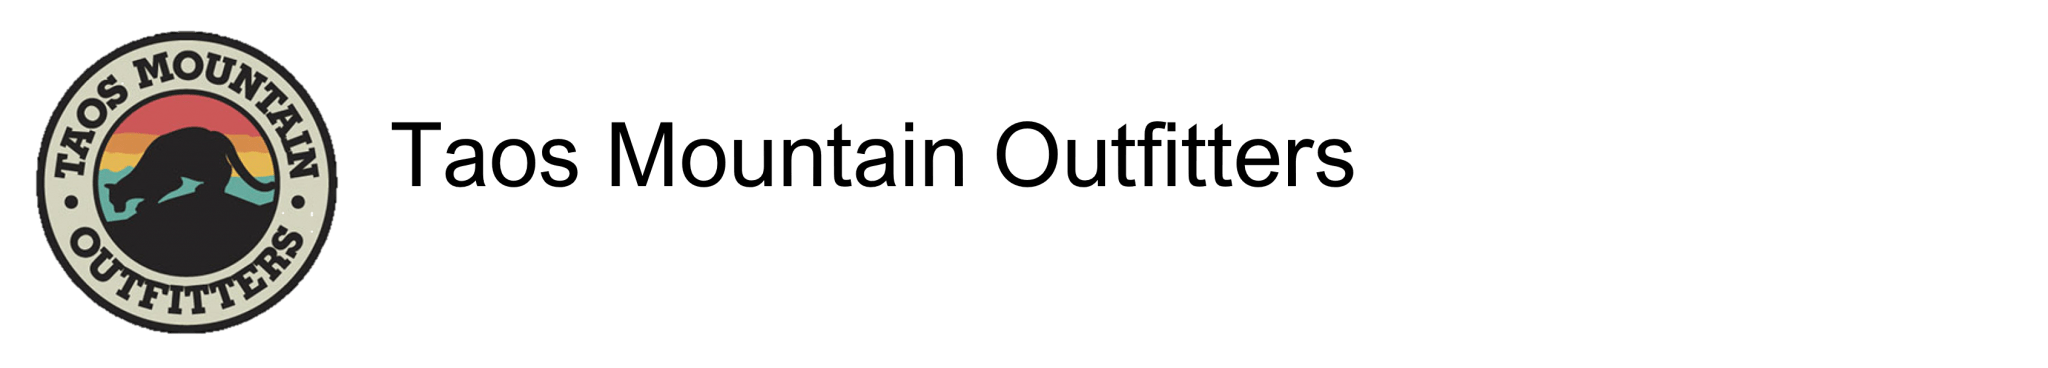 Taos Mountain Outfitters